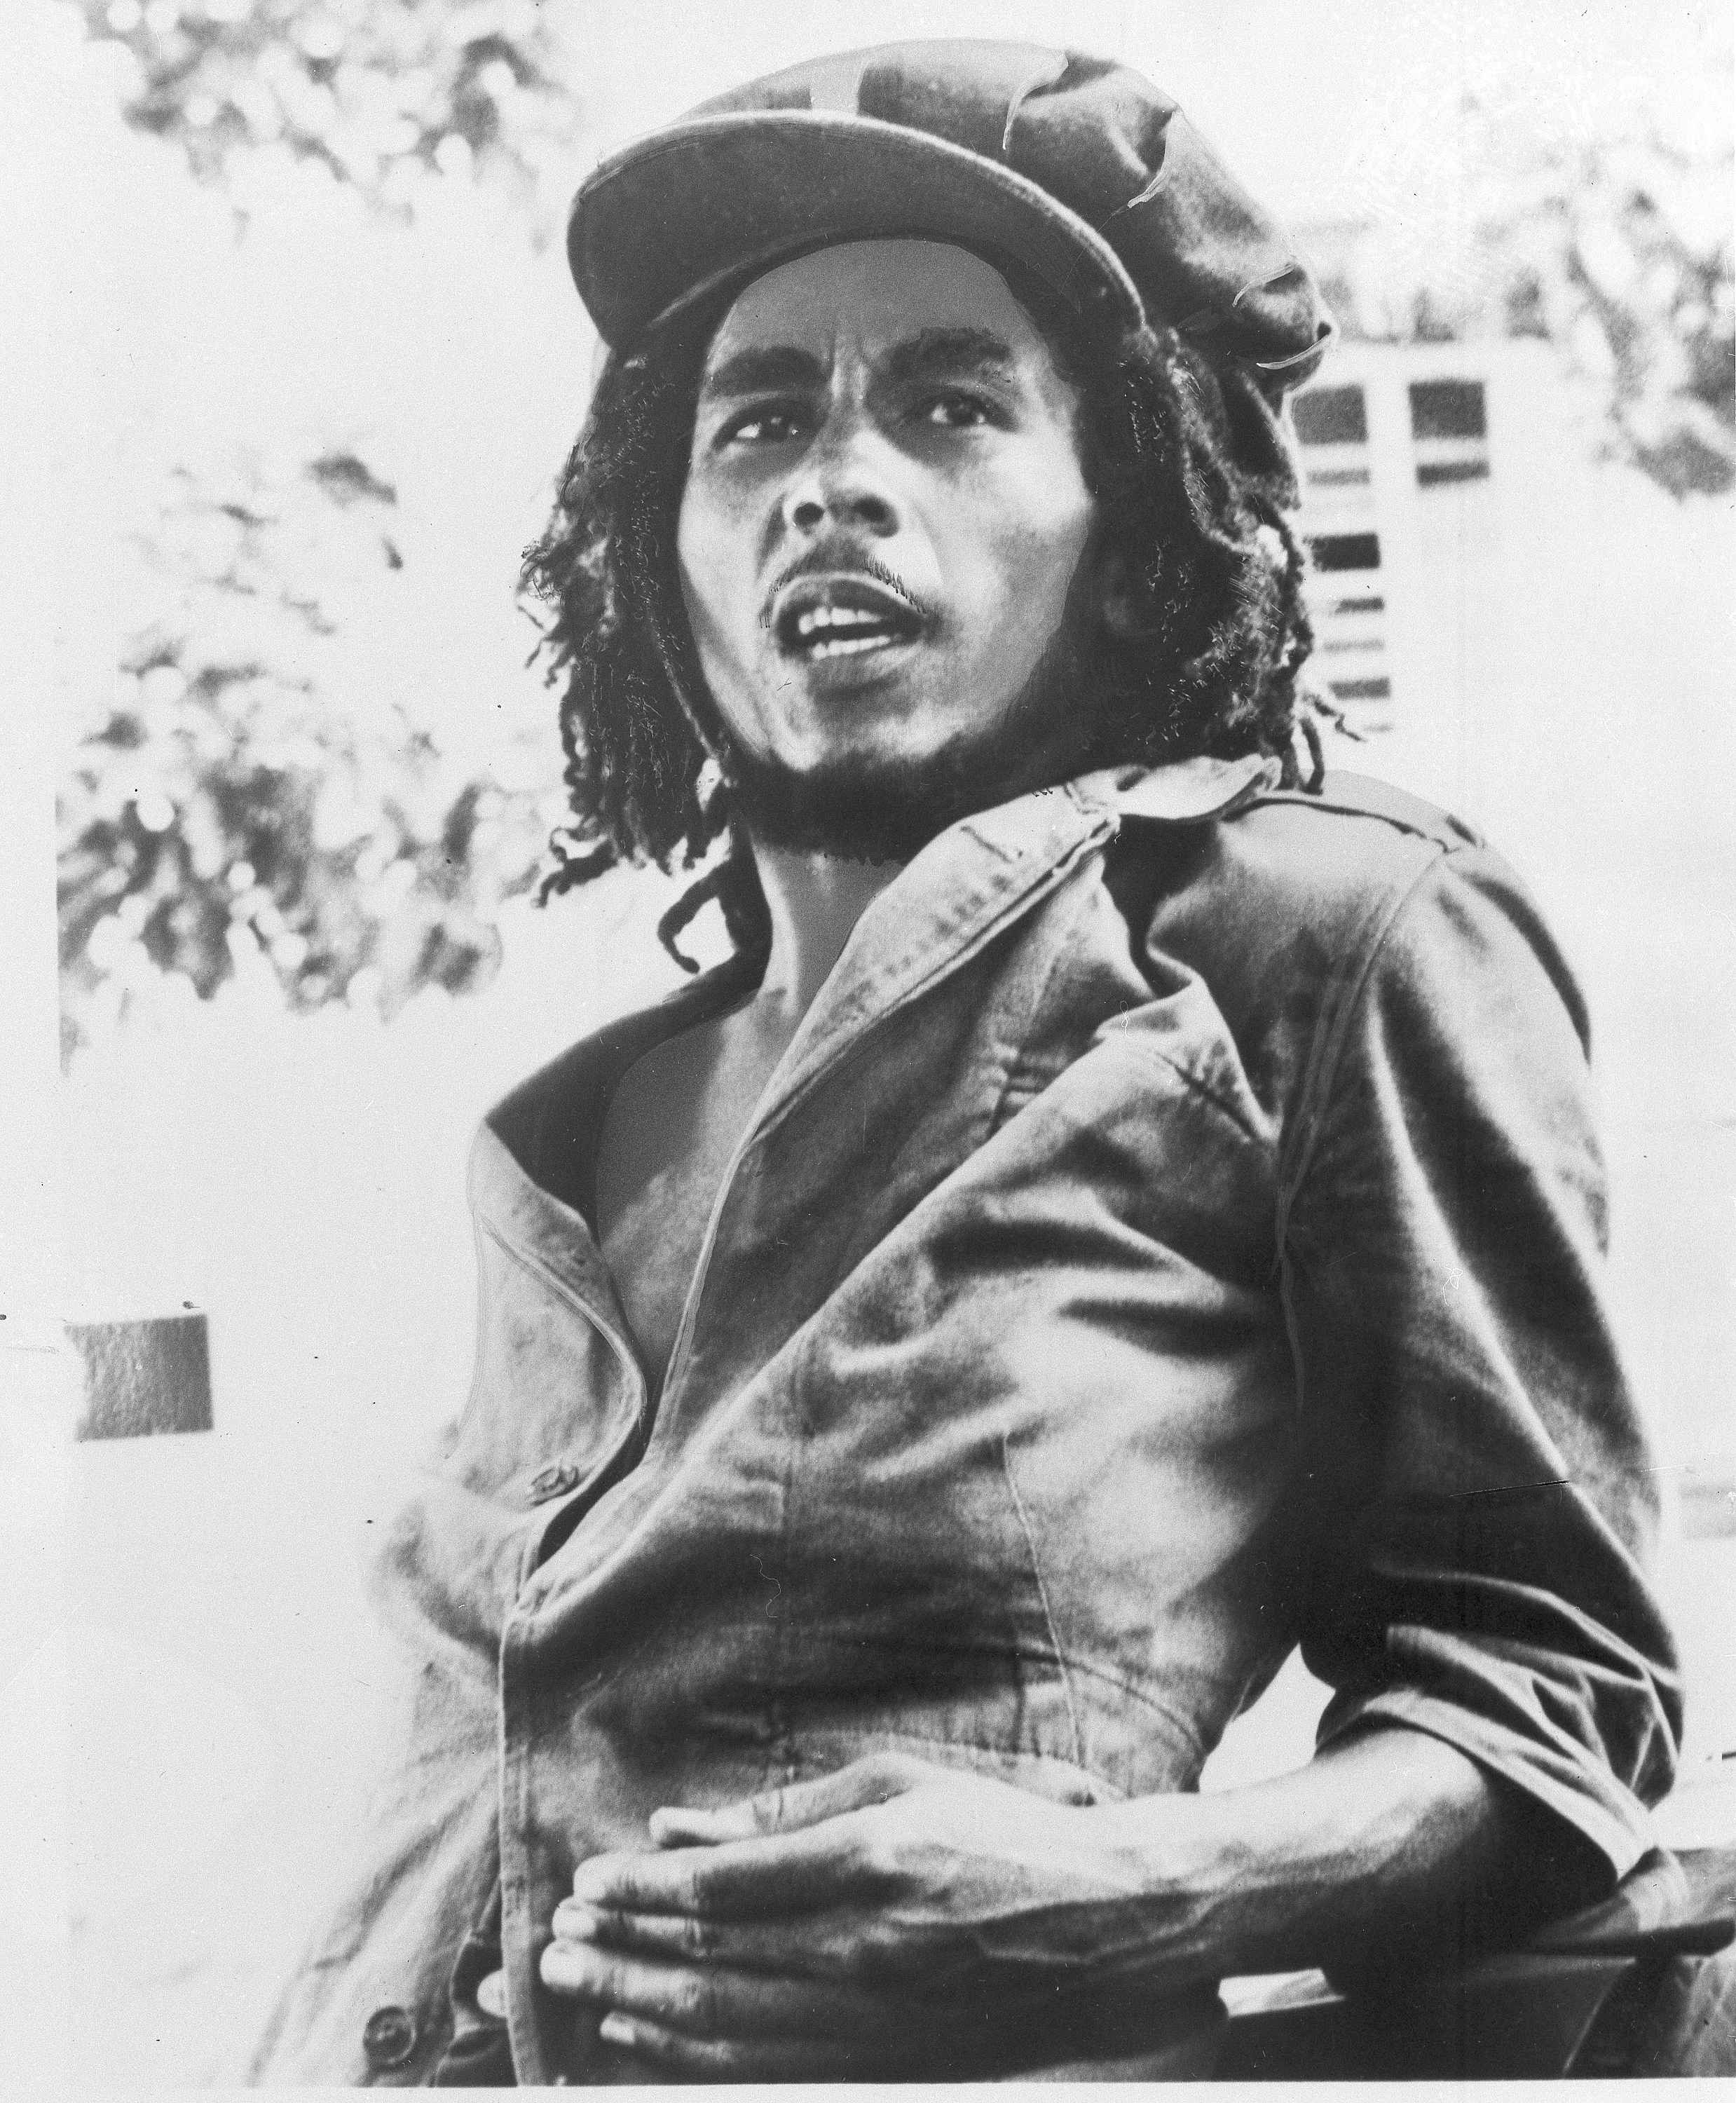 (Bob) MARLEY movie review (and related thoughts) | KRucialReggae's Blog2477 x 3000